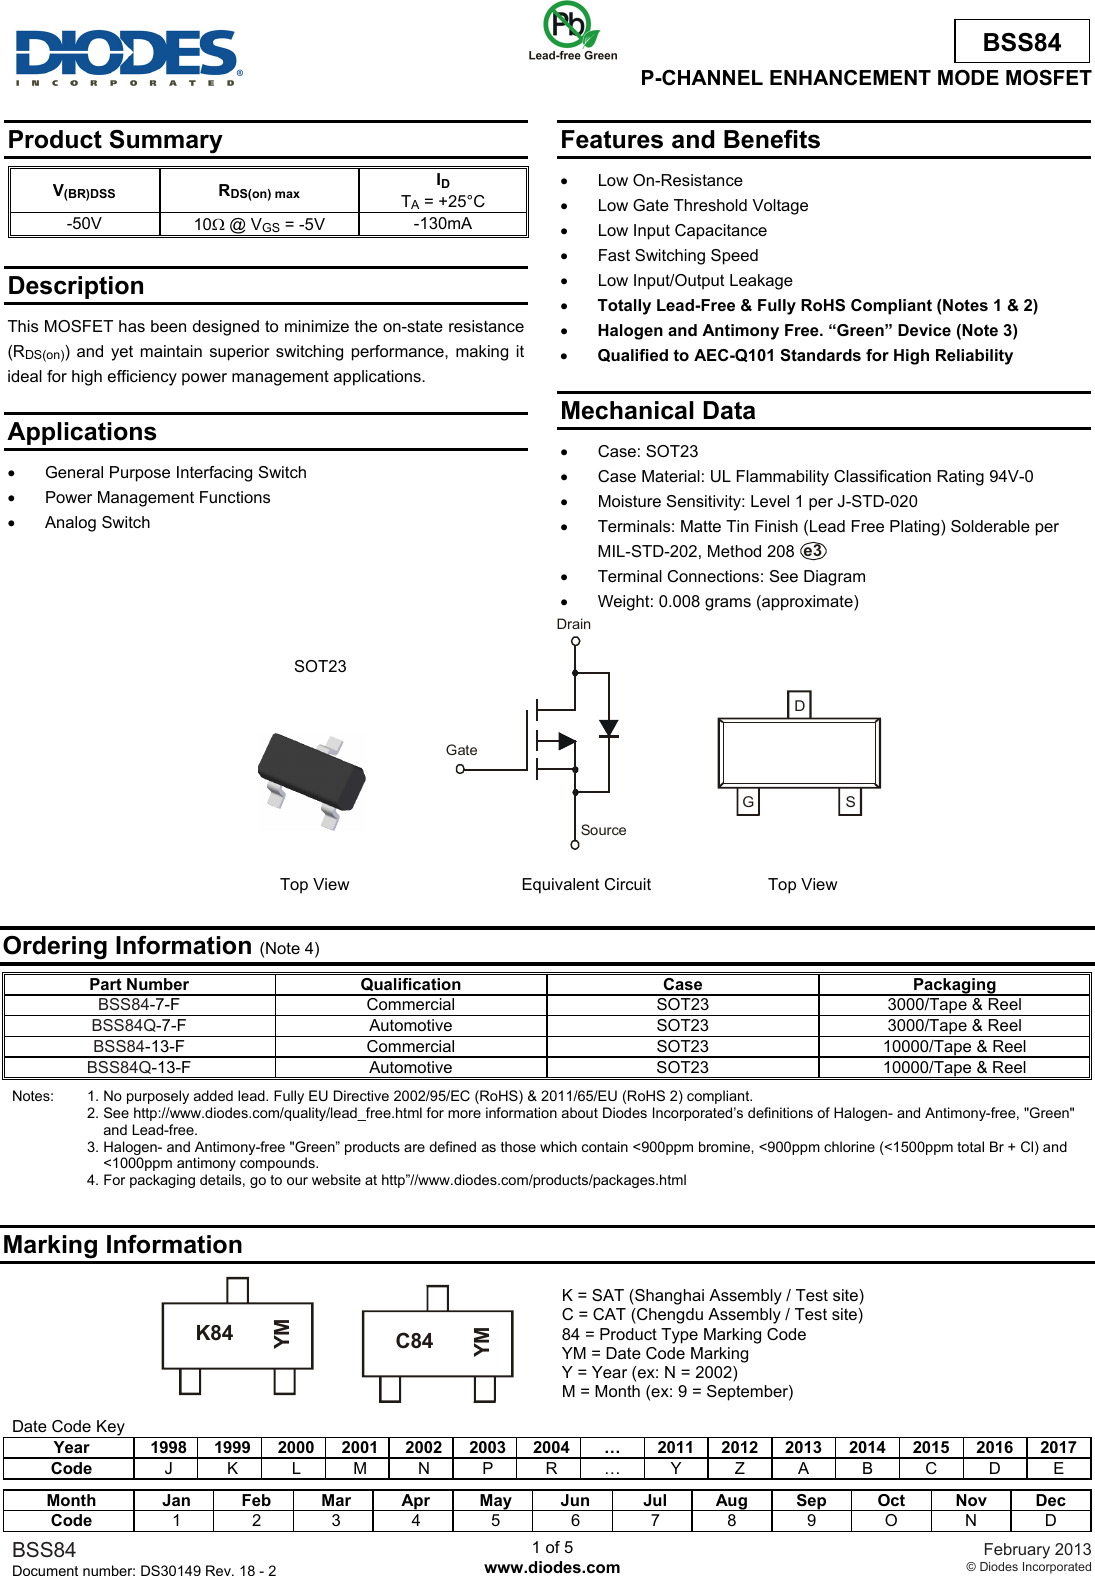 Page 1 of 6 - BSS84 - Datasheet. Www.s-manuals.com. Diodes